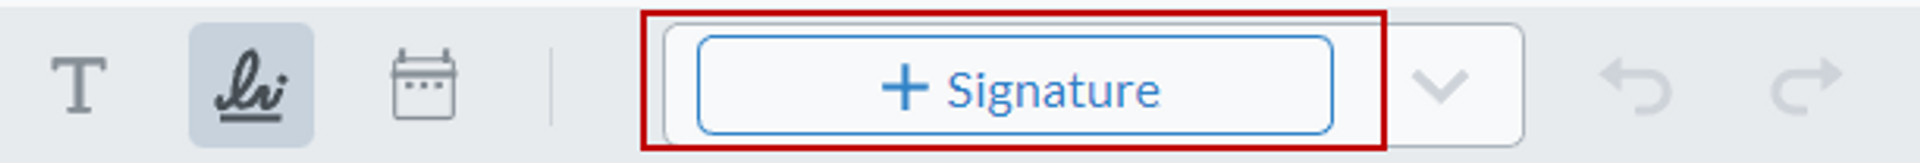 Selecting to add a new signature option in Xodo’s PDF signing tool